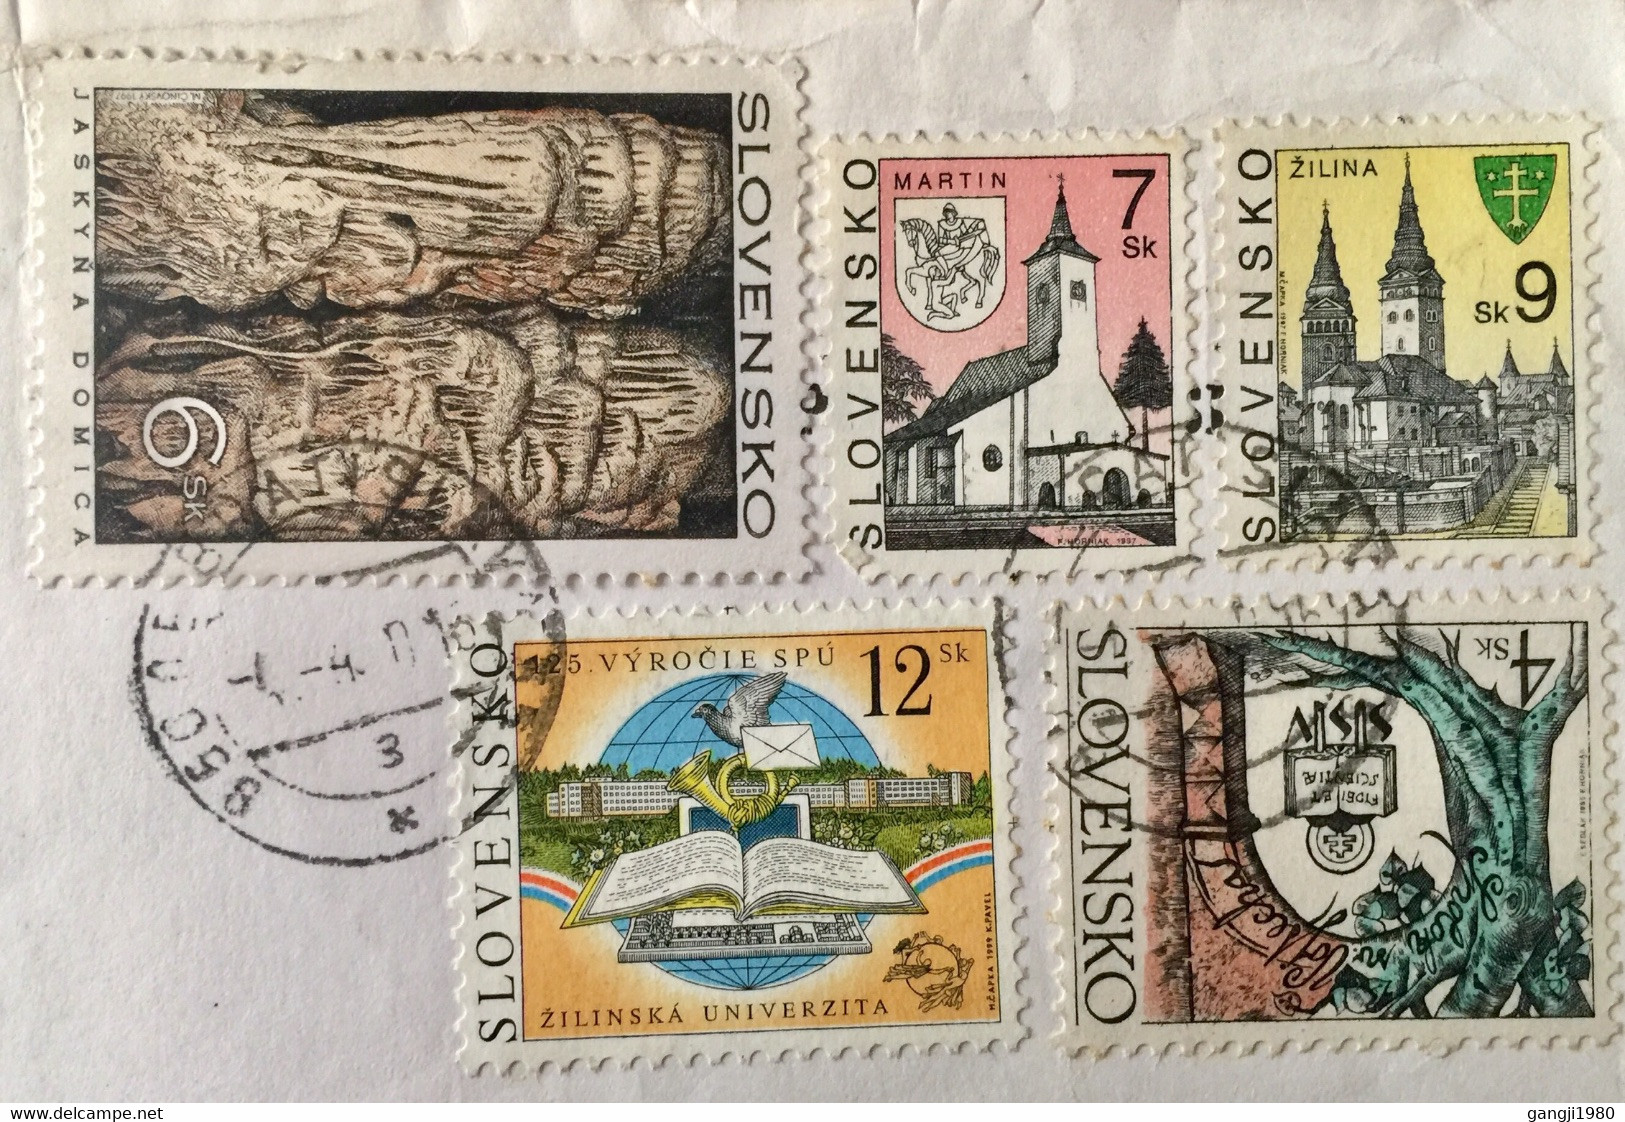 SLOVAKIA 2000, REGISTERED AIRMAIL COVER TO INDIA,5 STAMPS ,MARTIN ZILINA ,ZILINSKA UNIVERSITY JASKYNA DOMICA ,TREE - Lettres & Documents